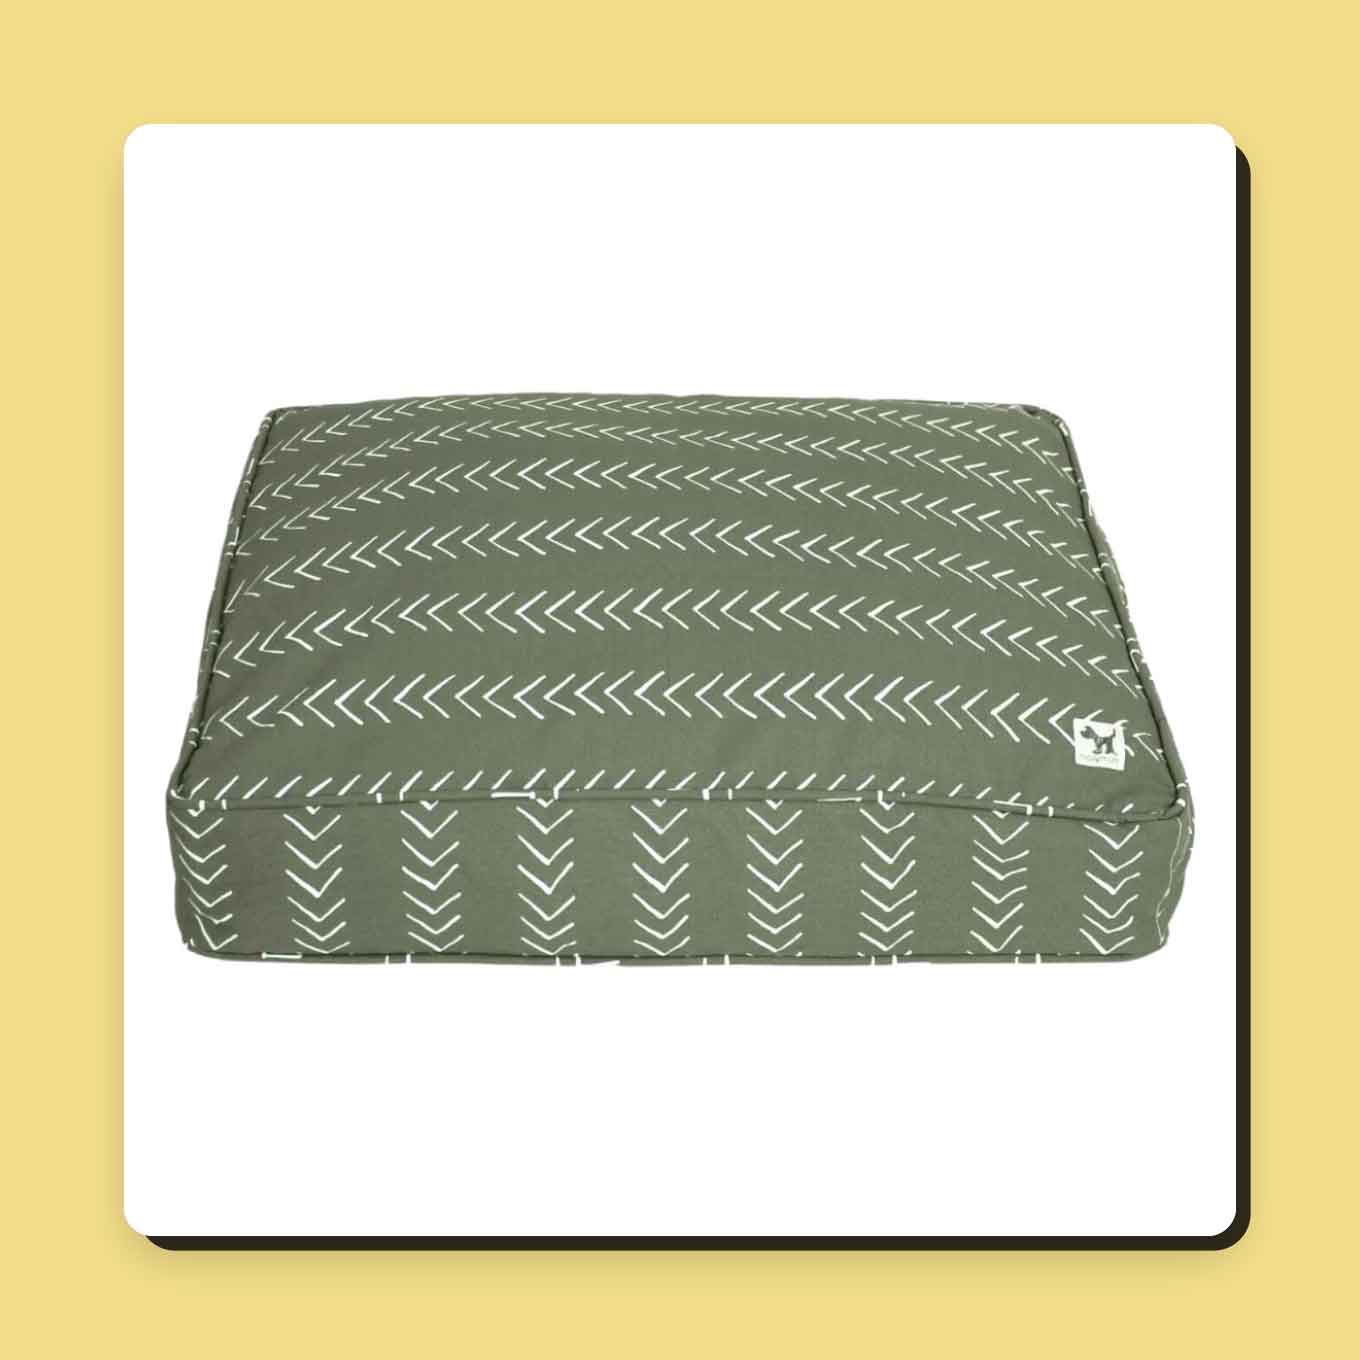 A green dog bed with a white chevron design